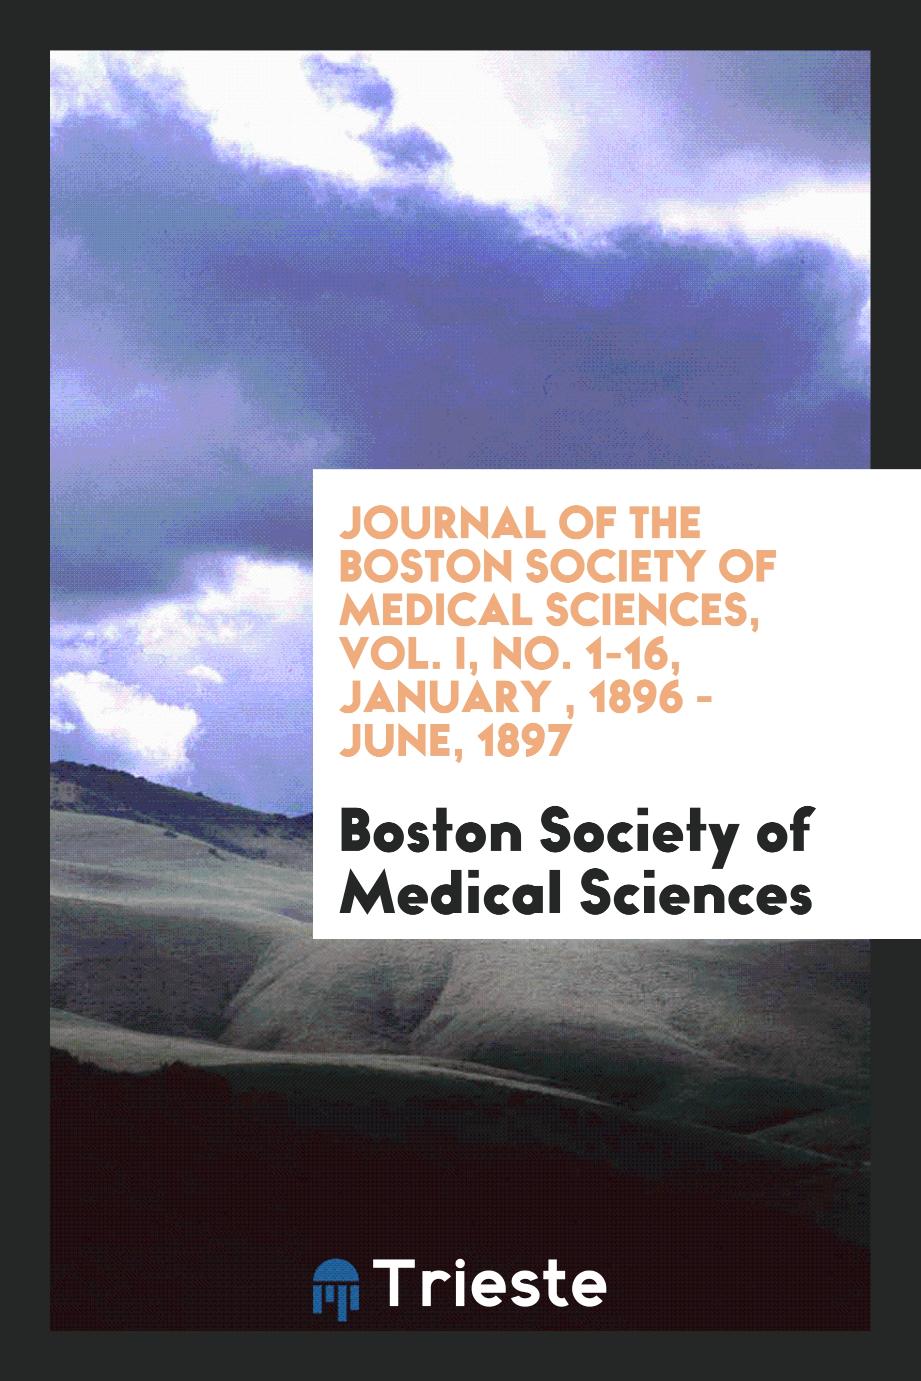 Journal of the Boston Society of Medical Sciences, Vol. I, No. 1-16, January , 1896 - June, 1897